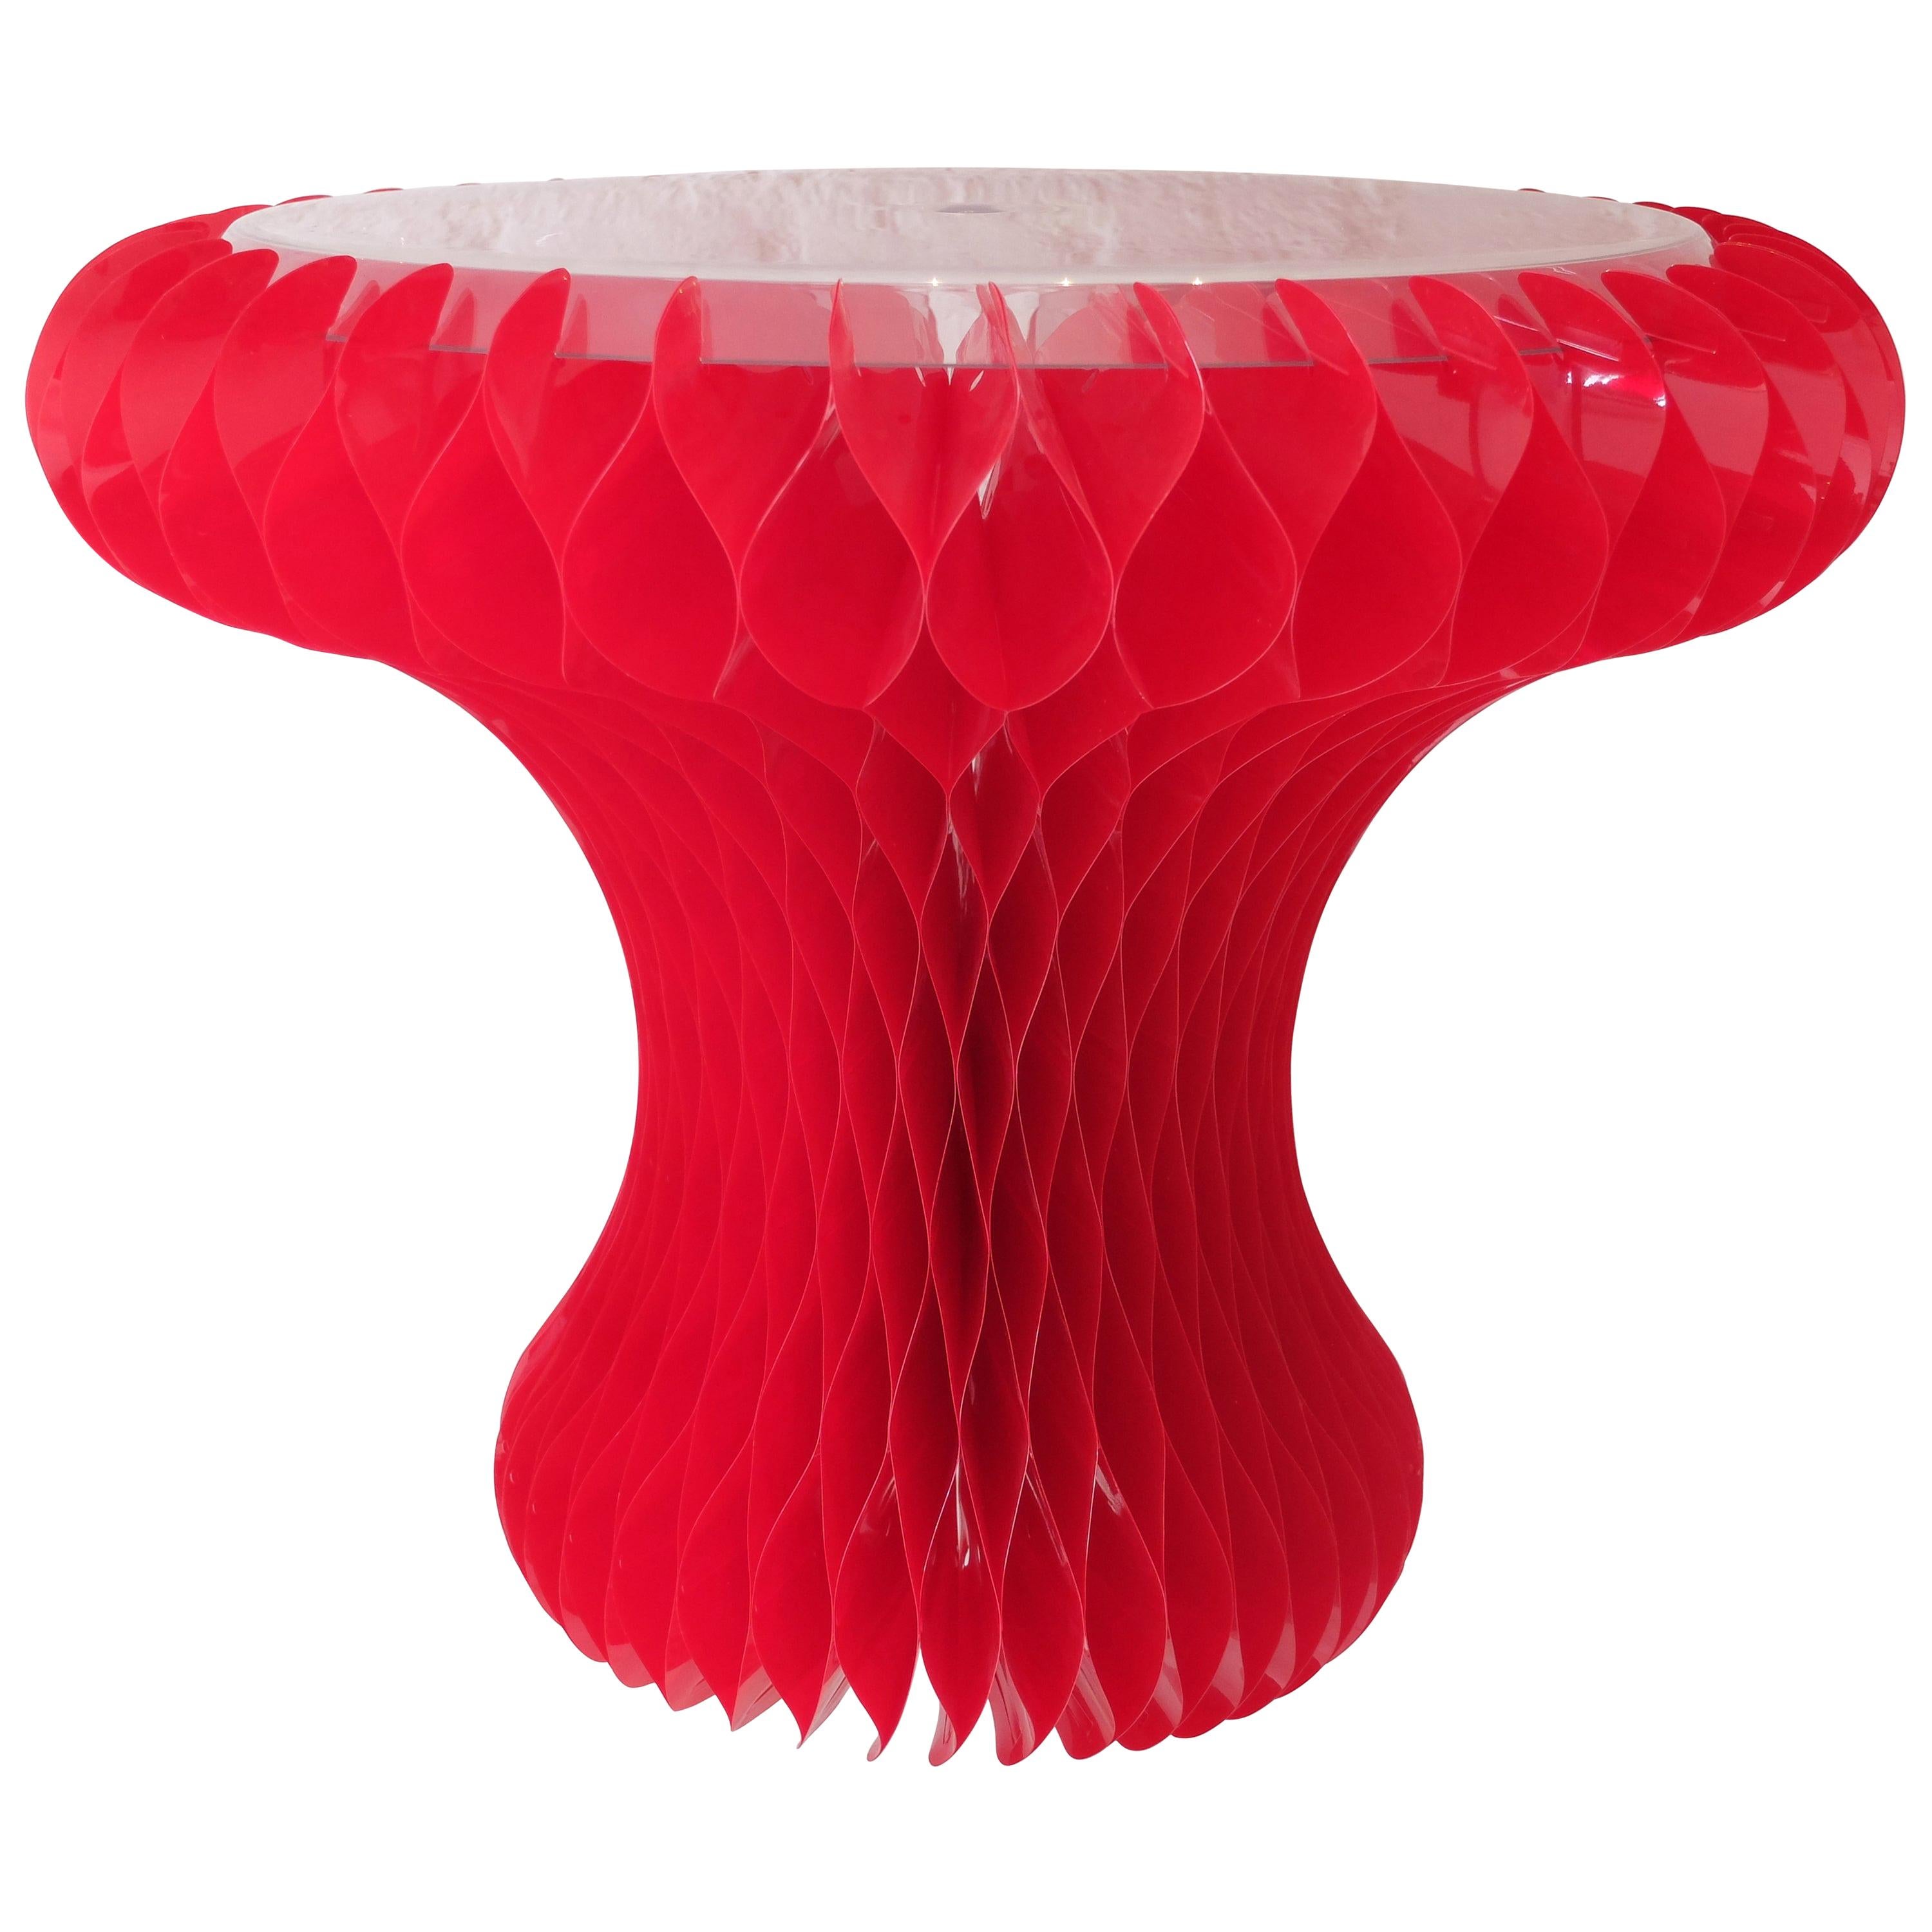 Marc Newson Red 'Gello' Table Made for Les 3 Suisses in 1994, Original Box For Sale